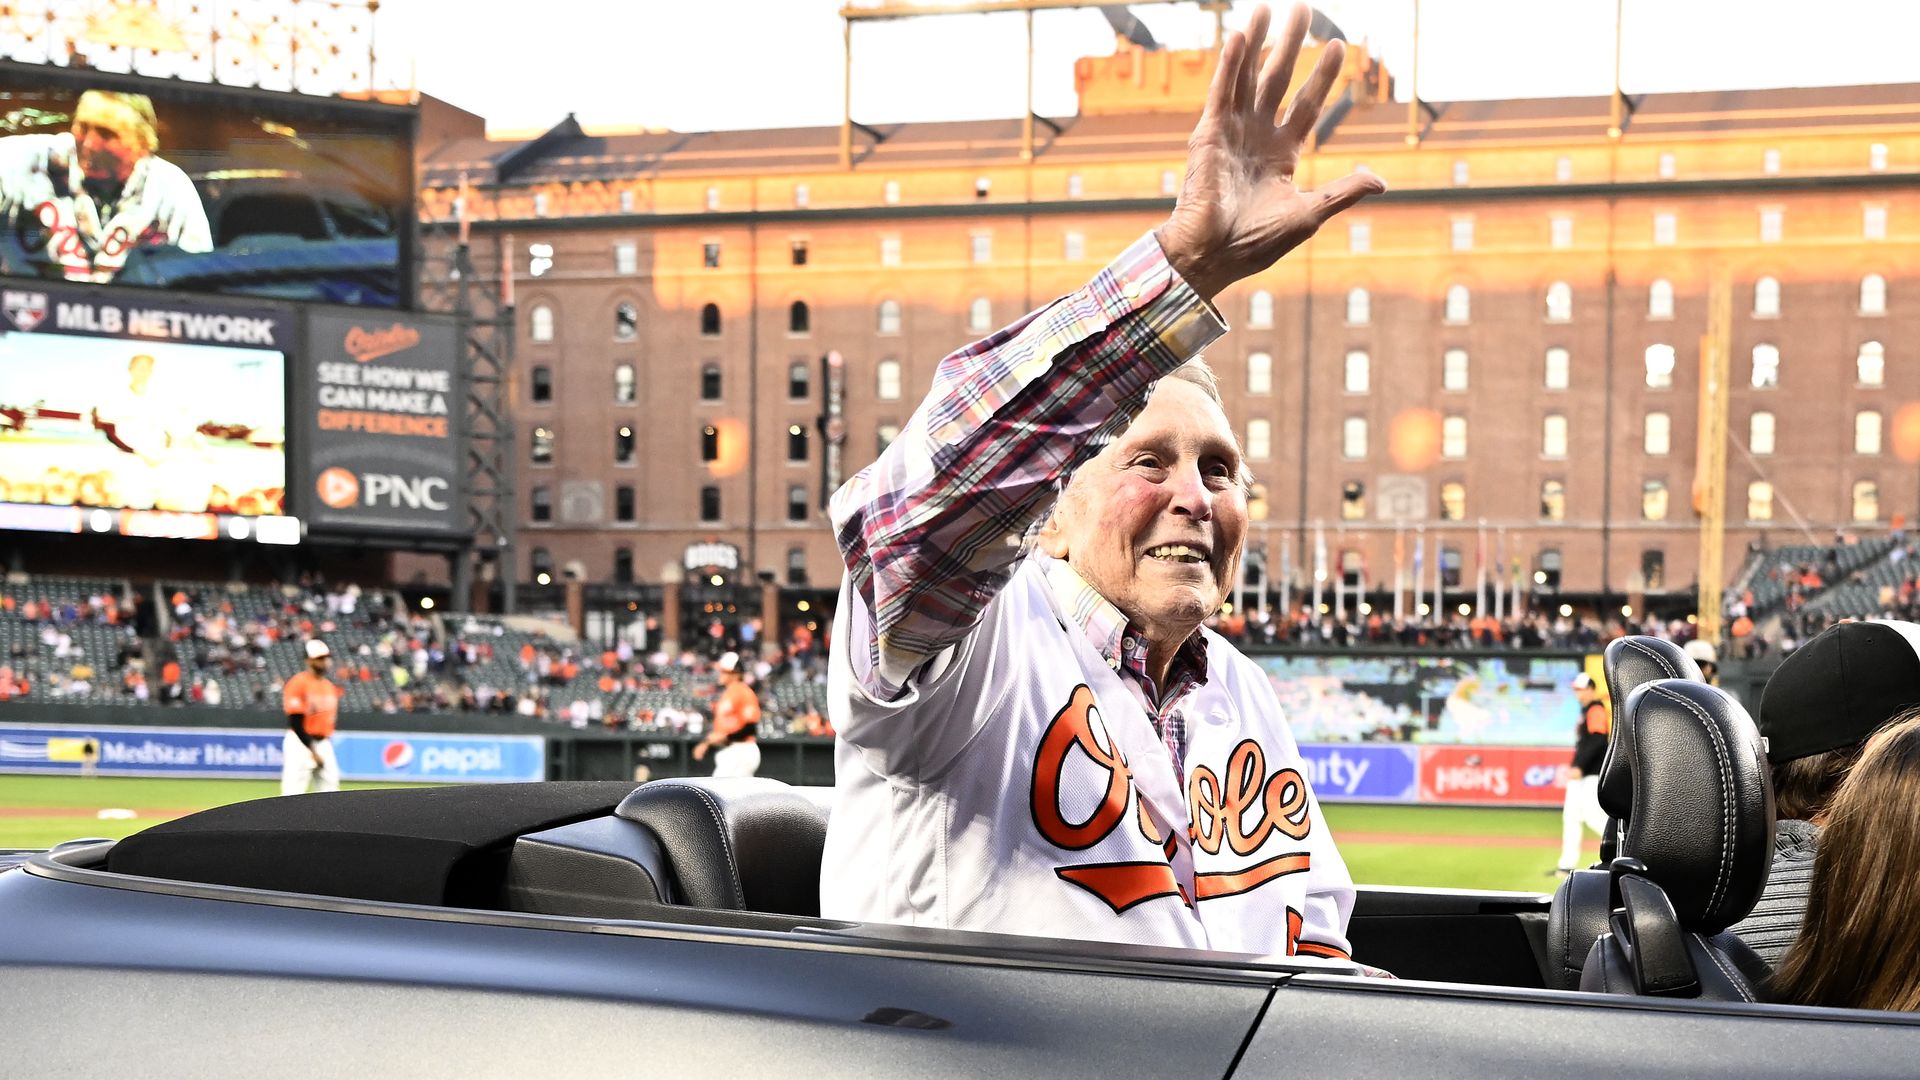 An aging Brooks Robinson rides in a convertible around Camden Yards and waves to the crowds